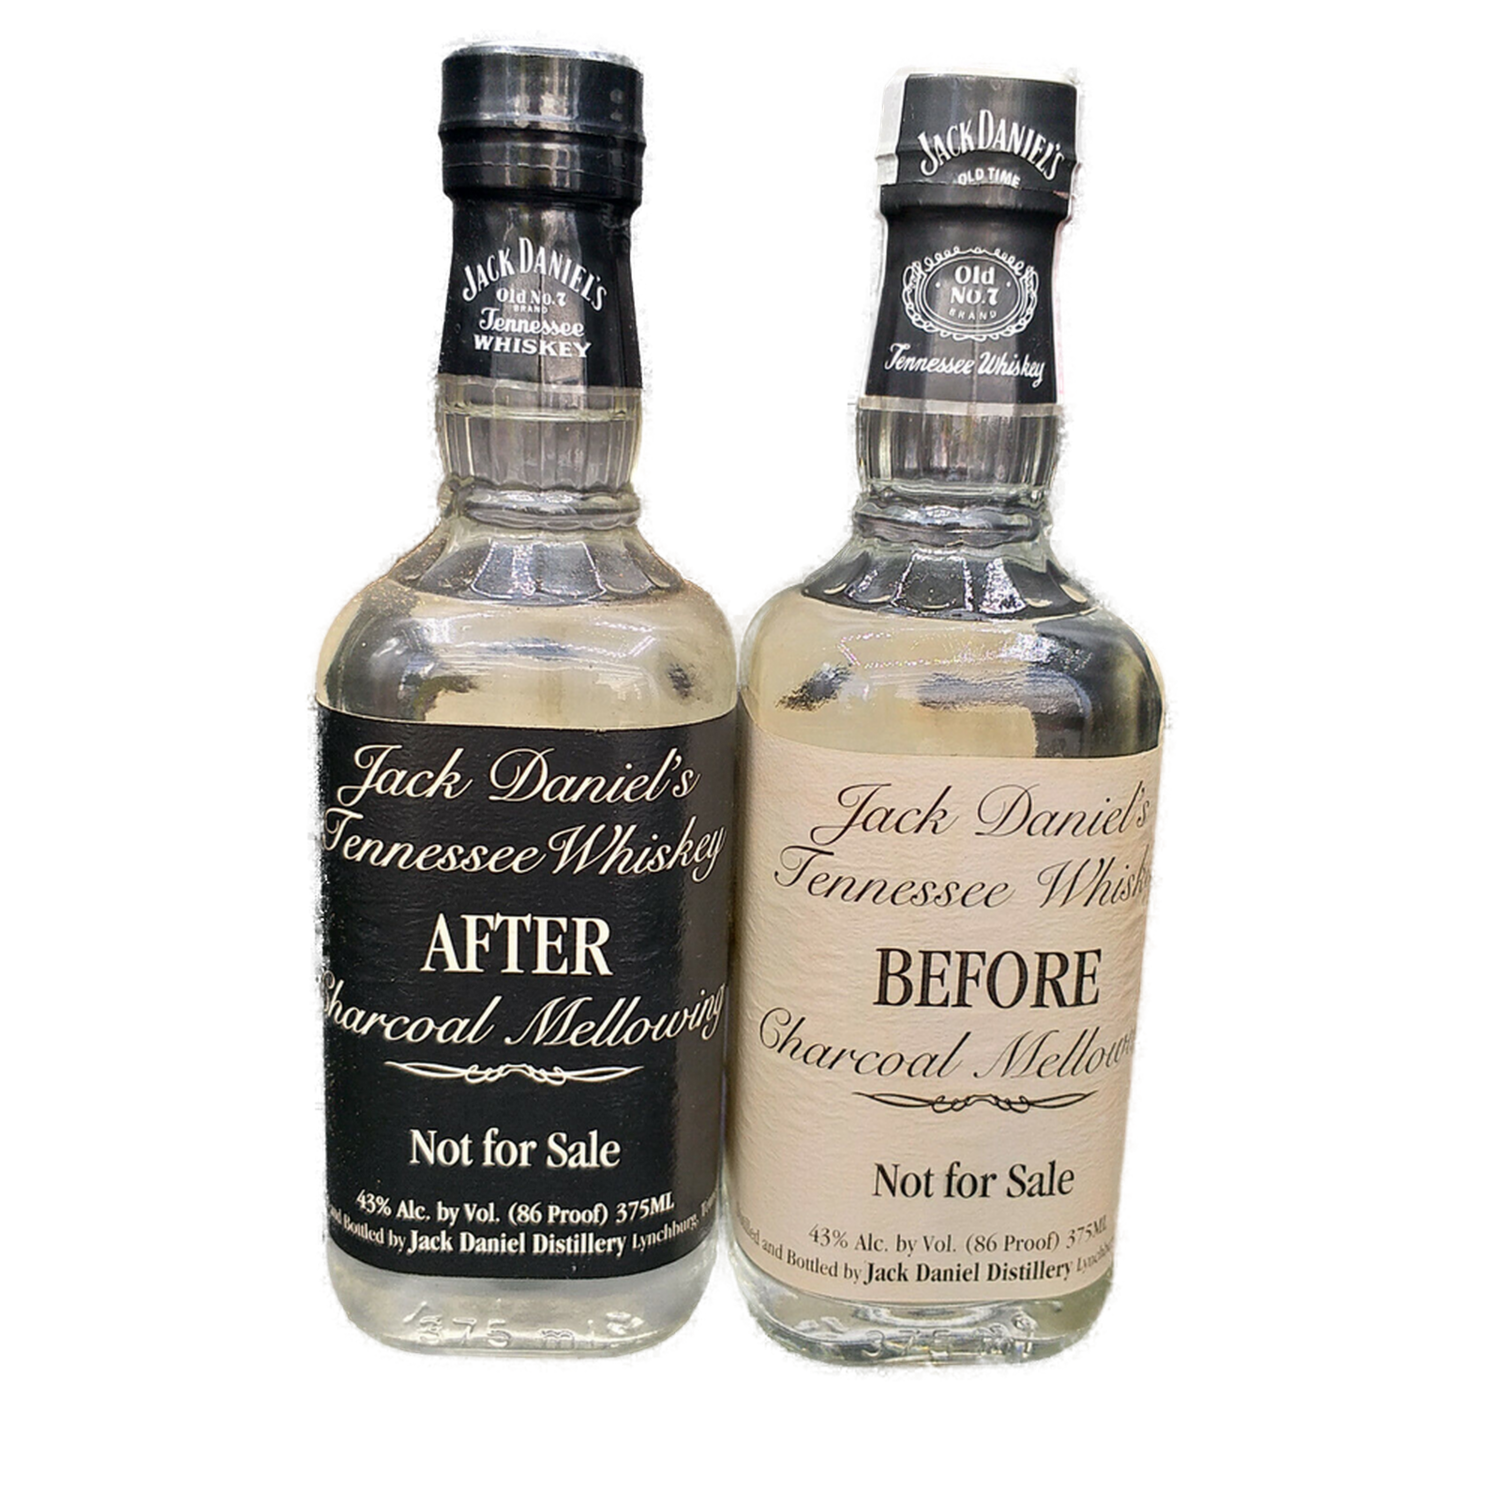 Jack Daniel's Tennessee Whiskey 'Before' und 'After' Charcoal Mellowing USA  43% VOL. (je Flasche 375 ml) SET